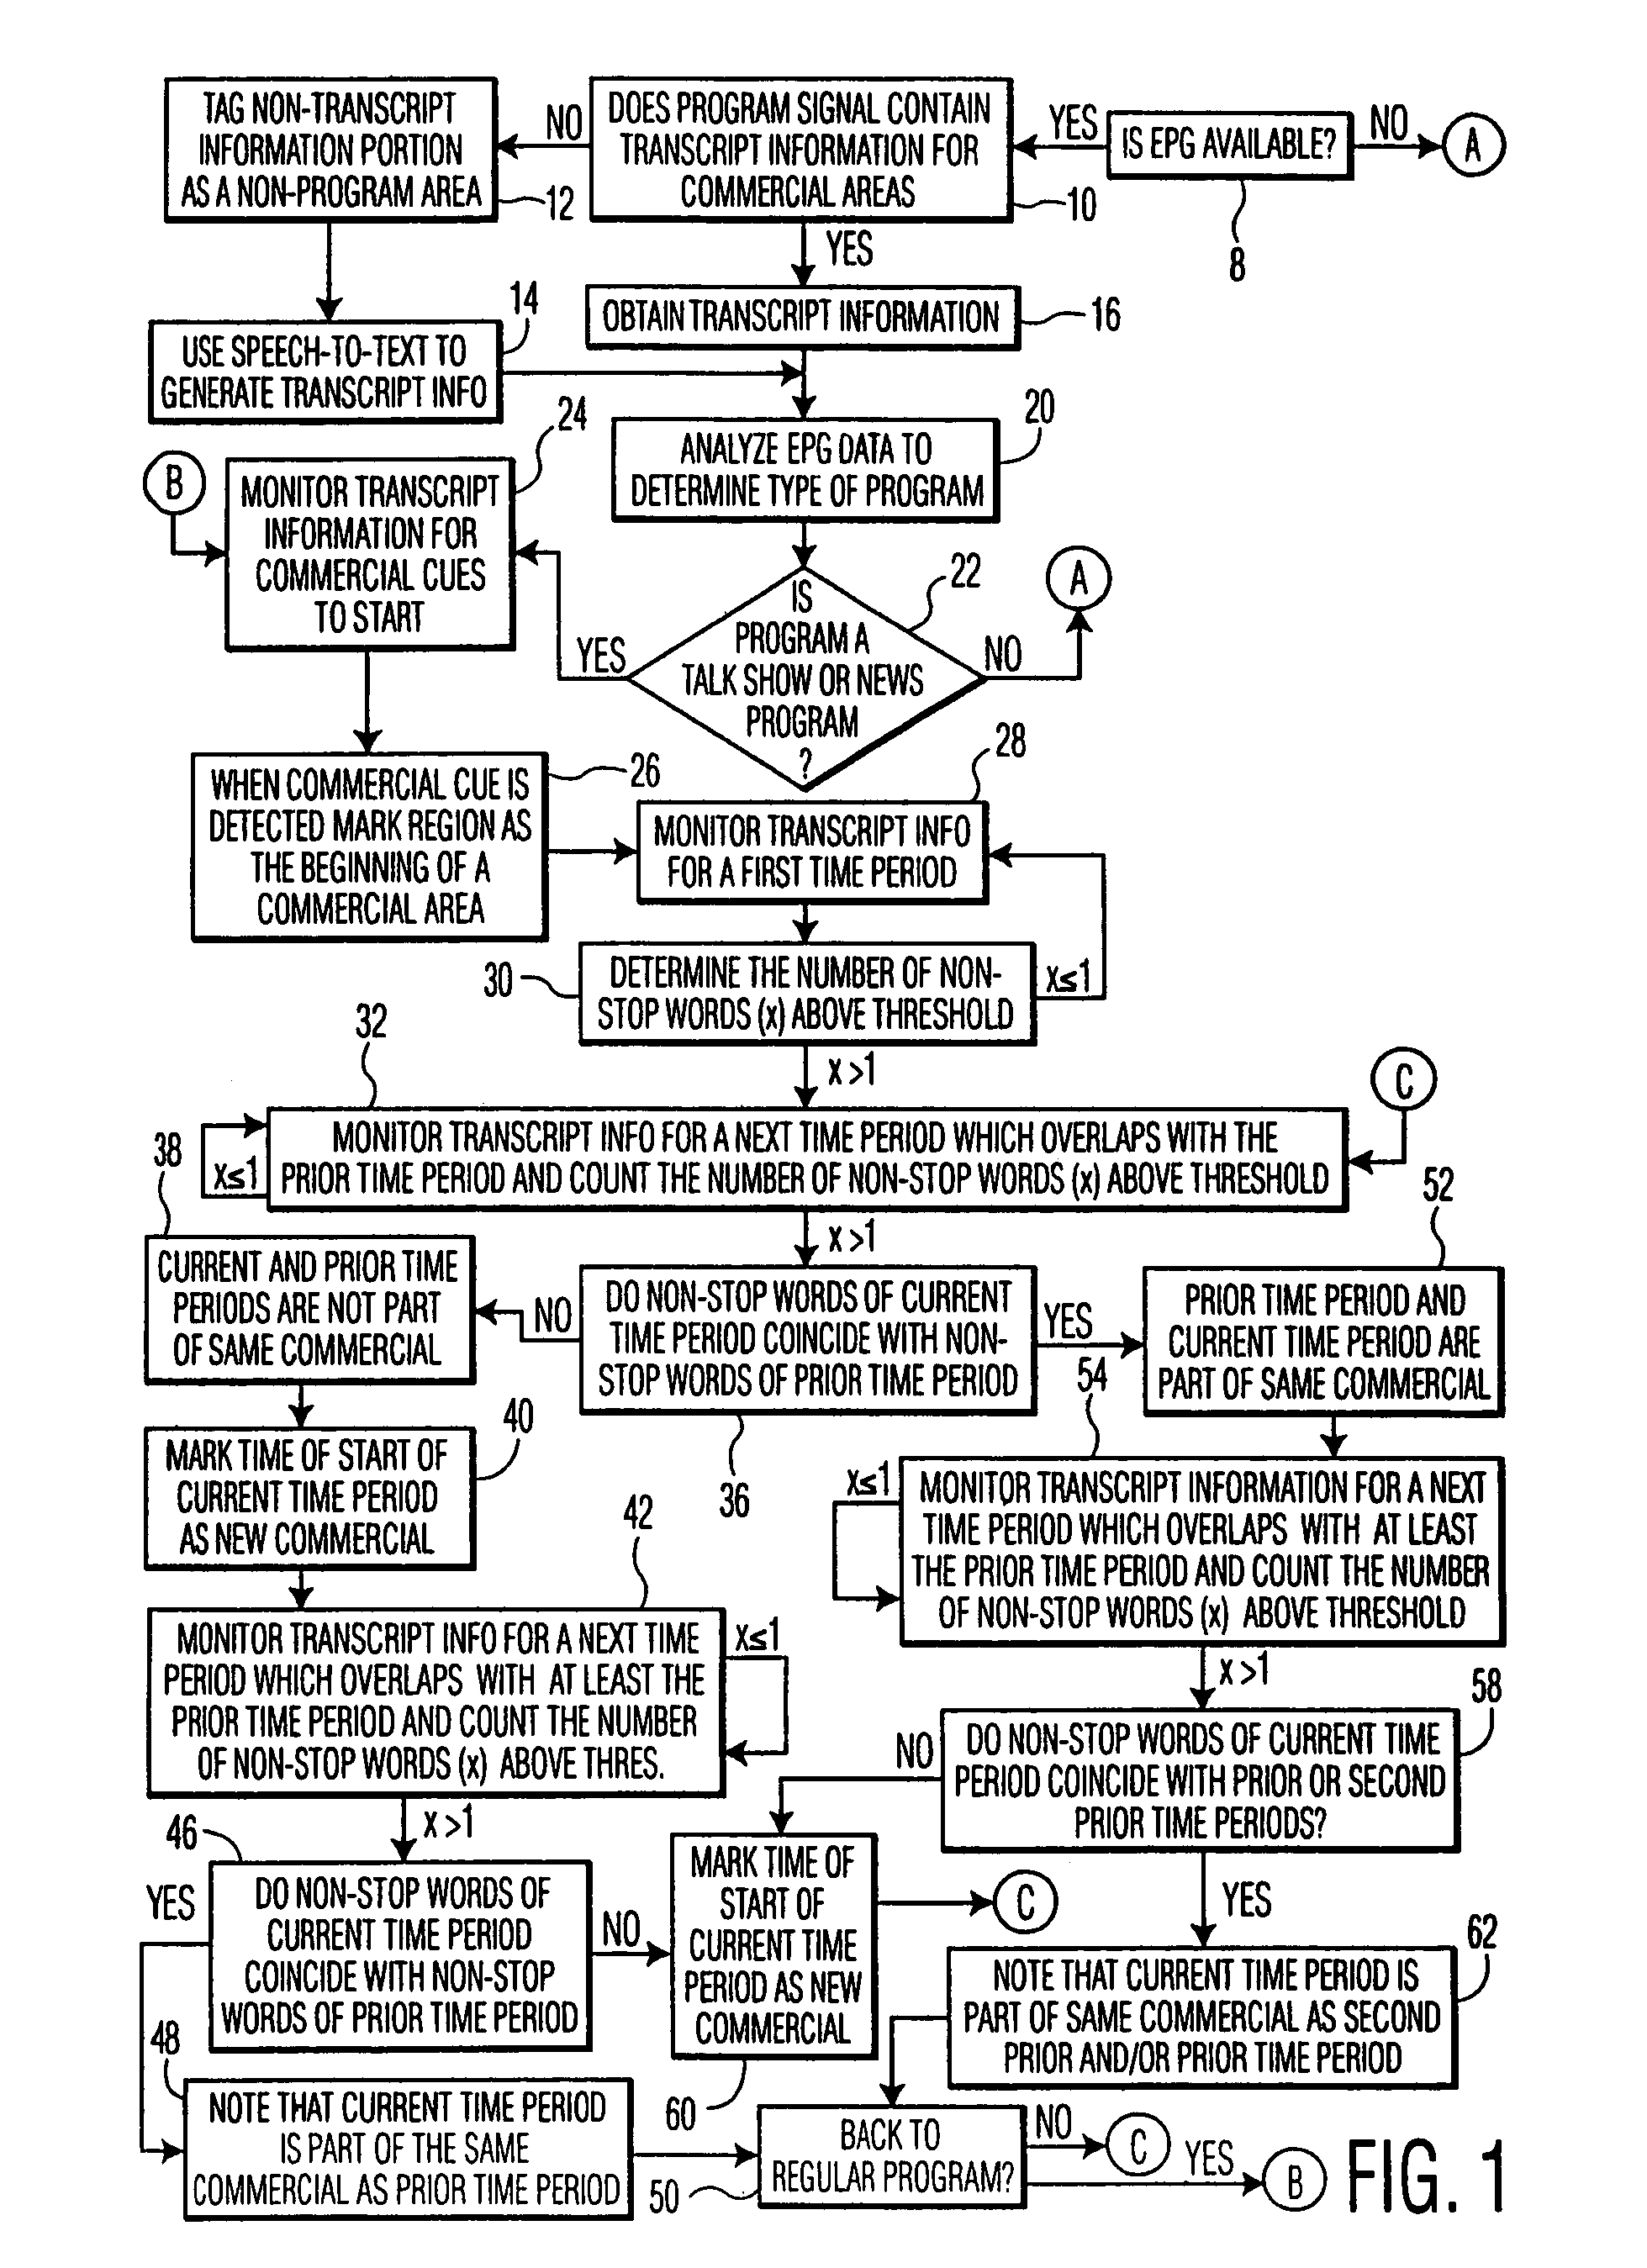 Method of using transcript information to identify and learn commercial portions of a program